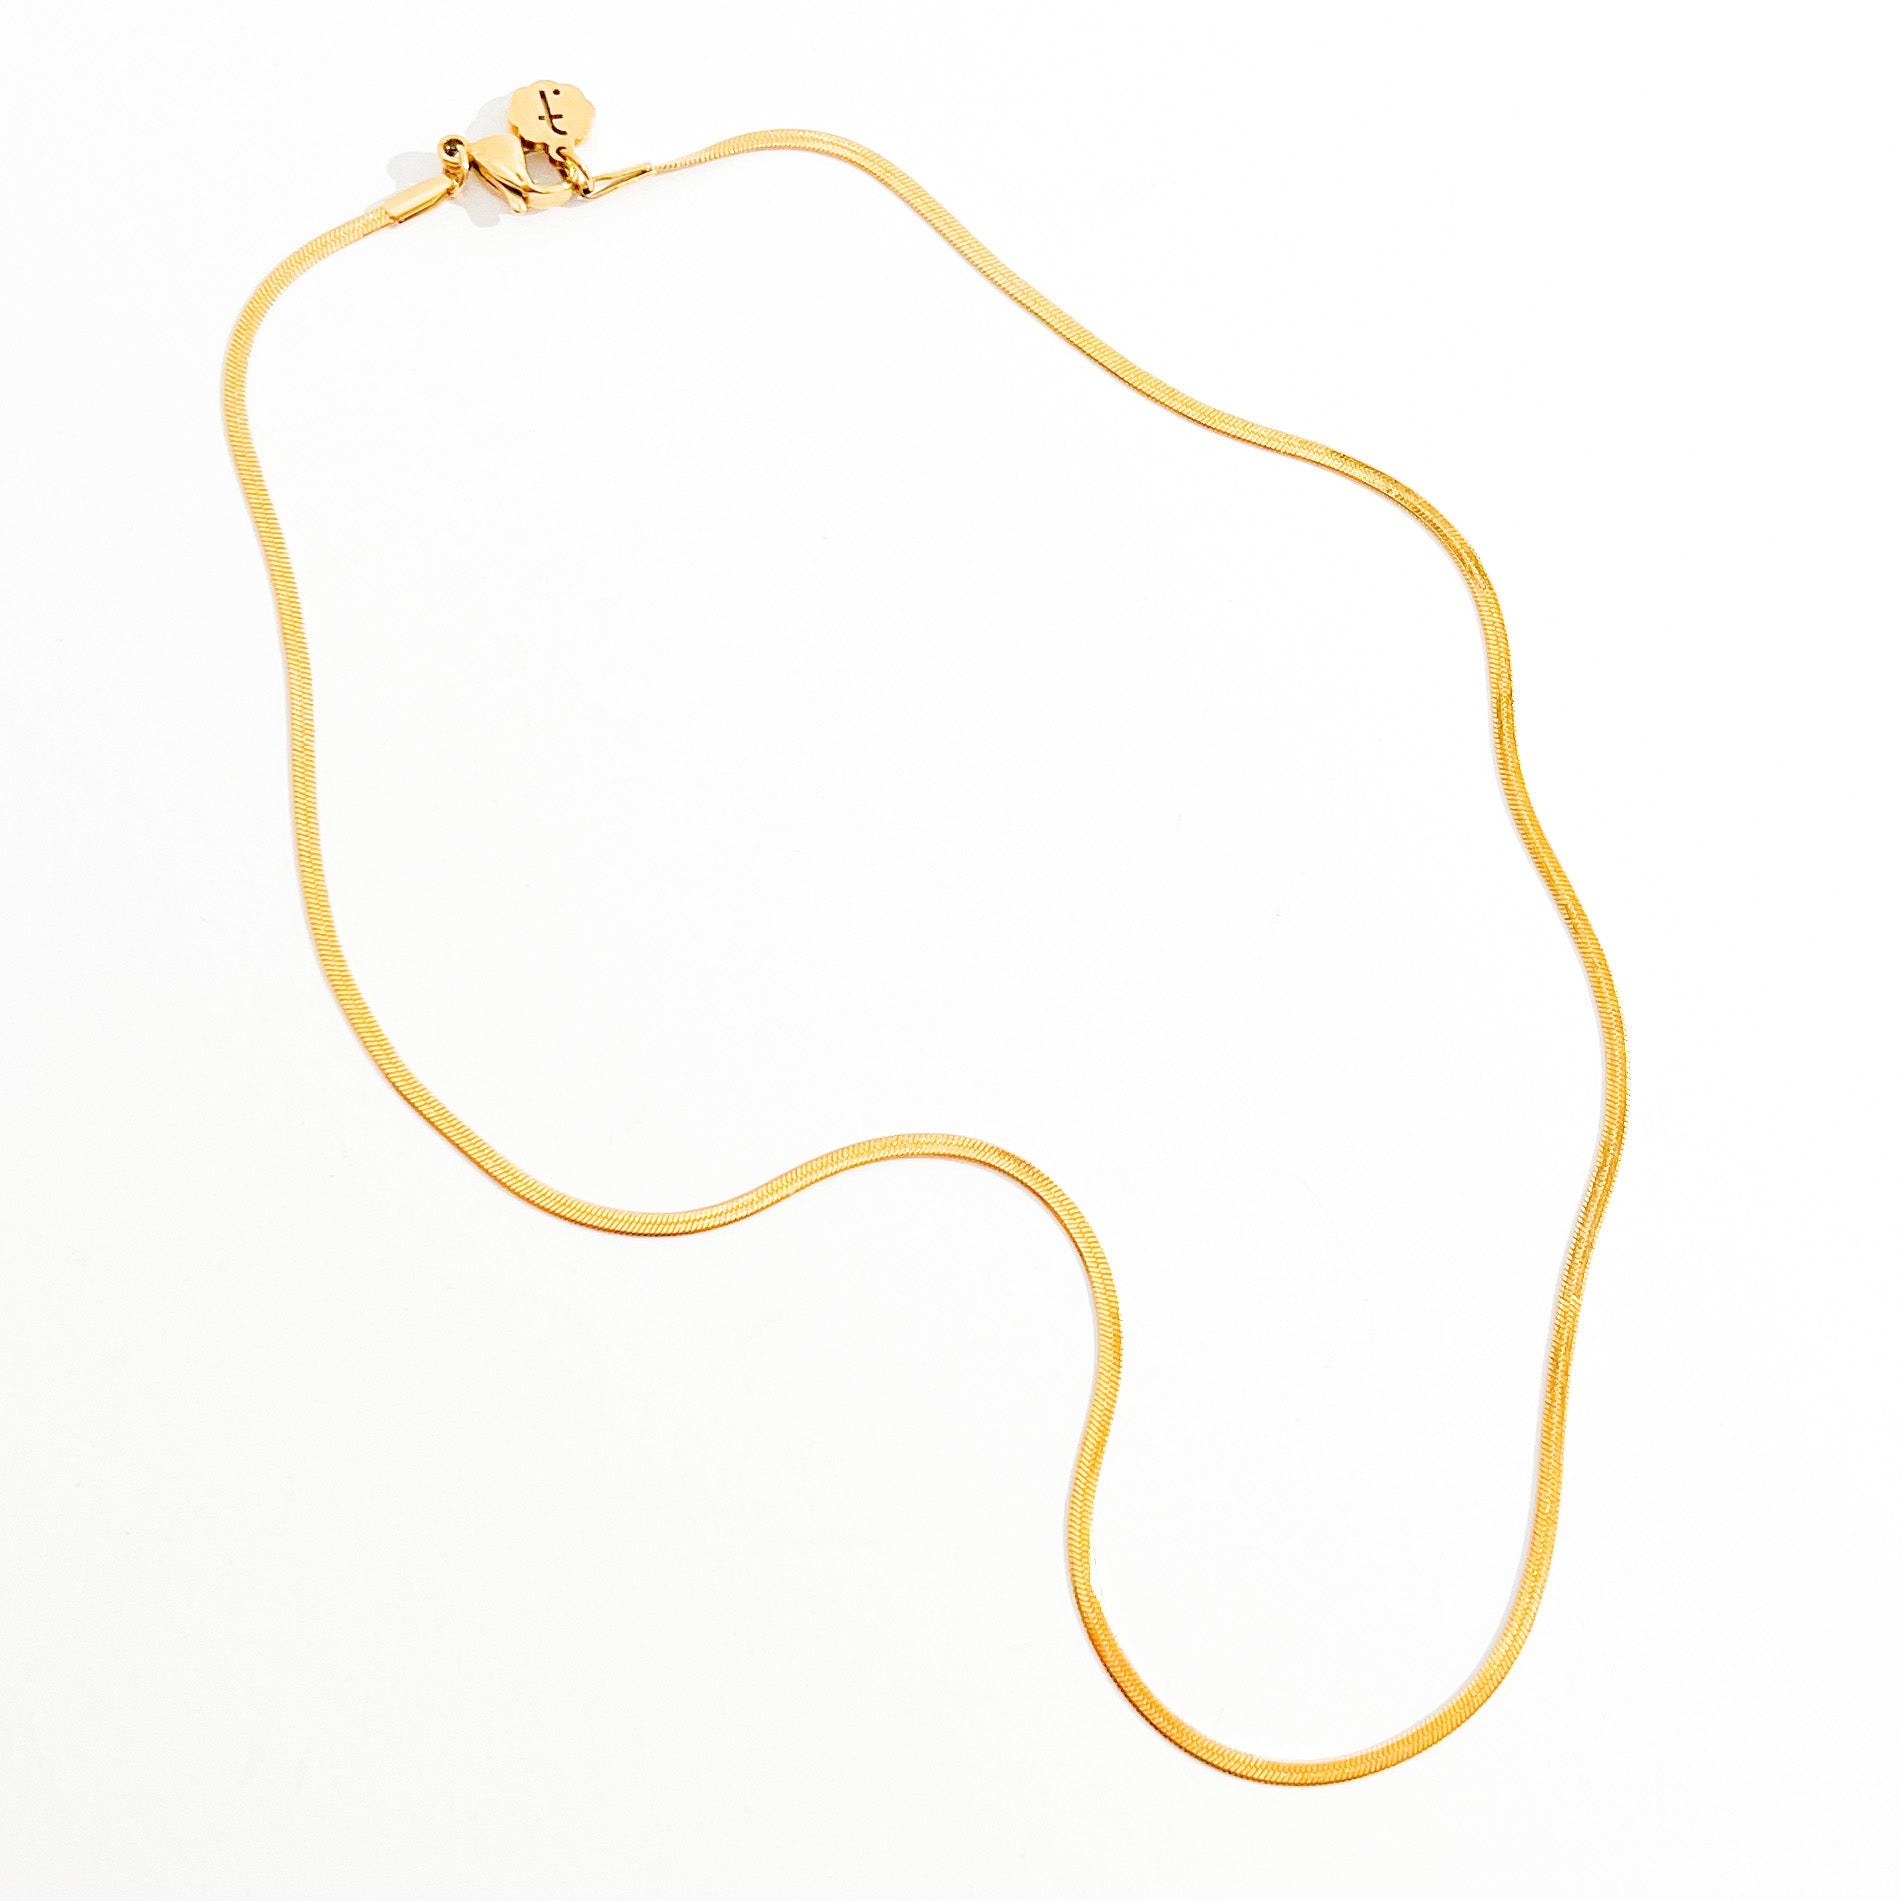 Thin Herringbone Necklace in Gold - Flaire & Co.